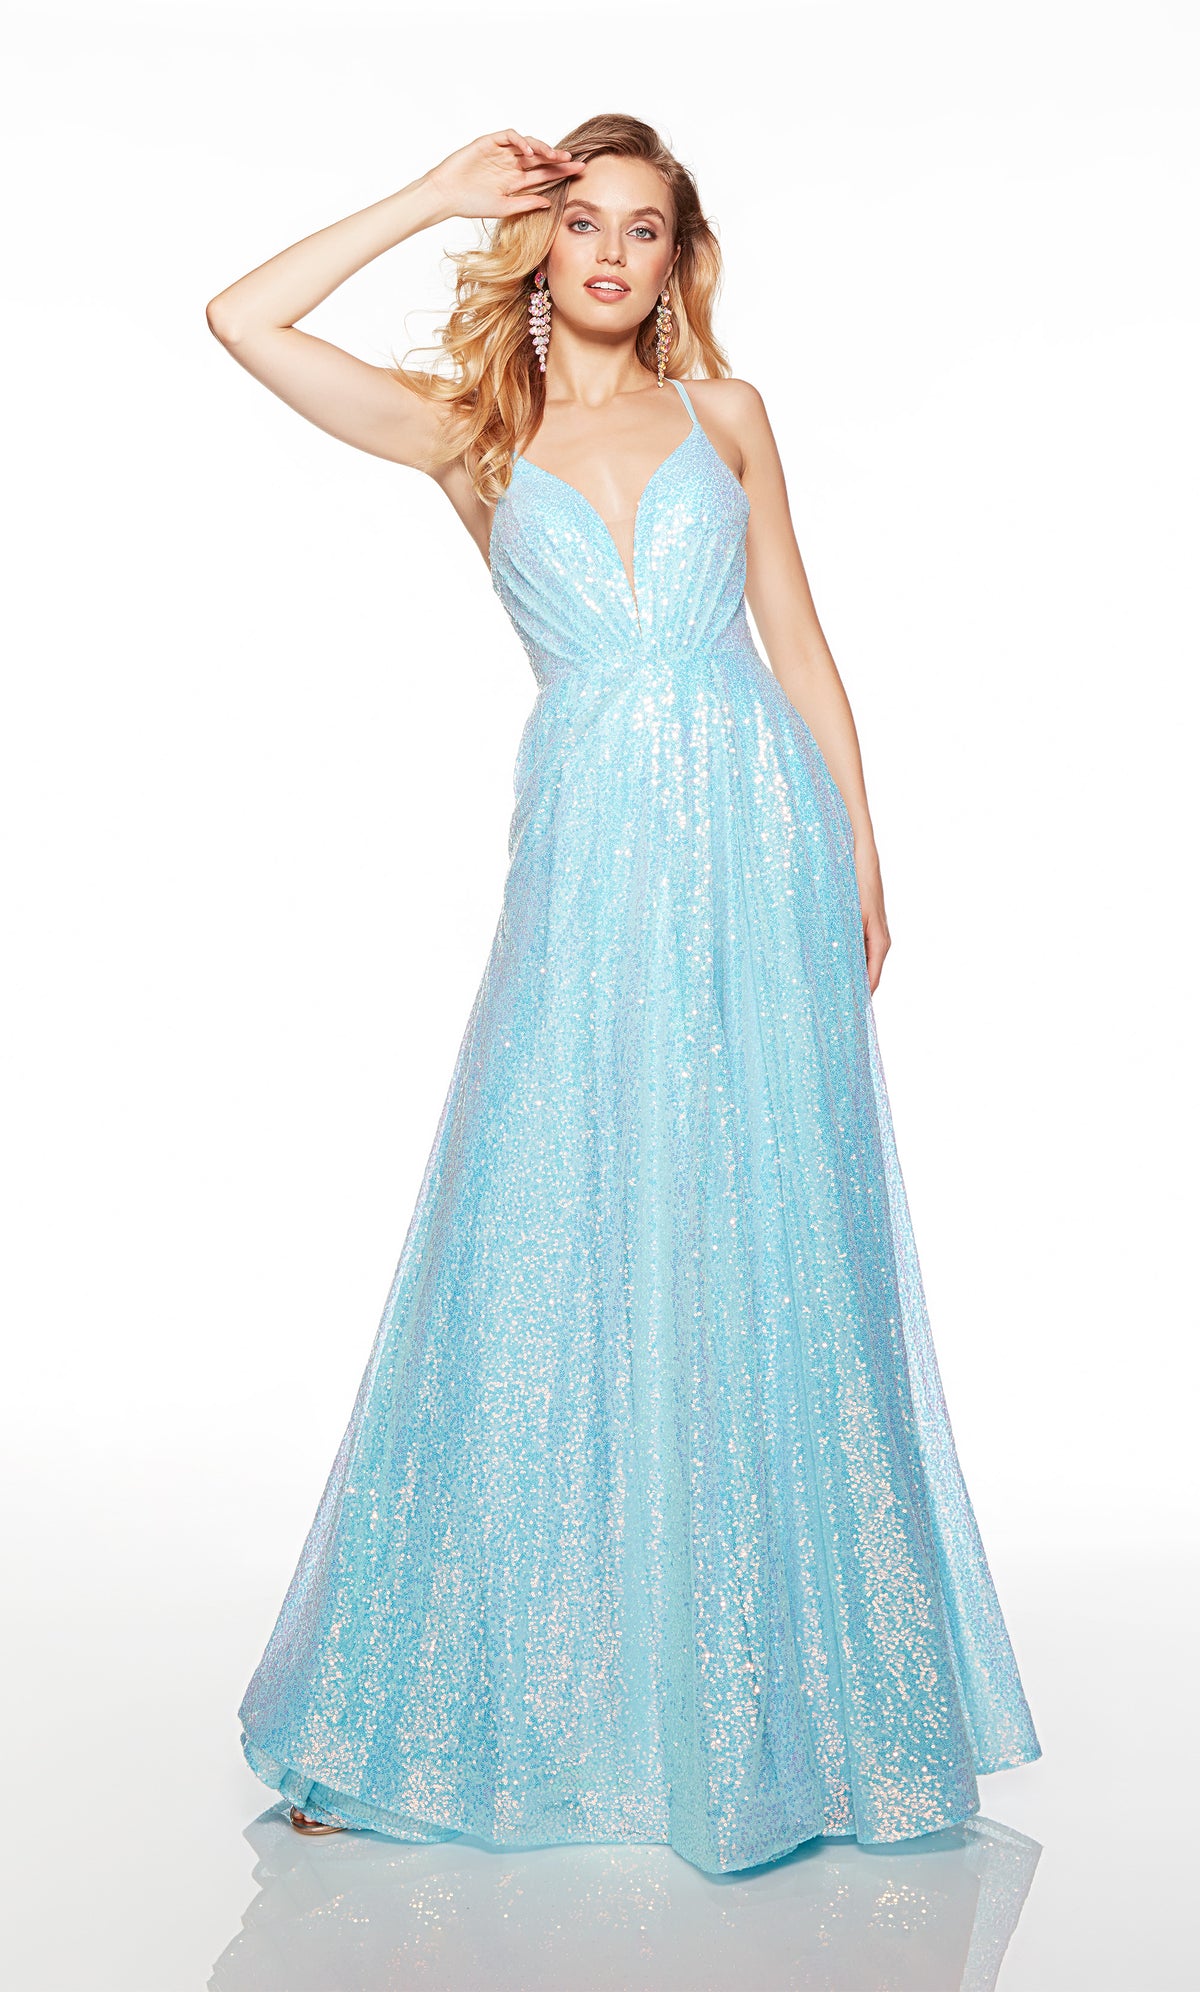 Light blue A line formal dress with a plunging neckline in iridescent sequins.